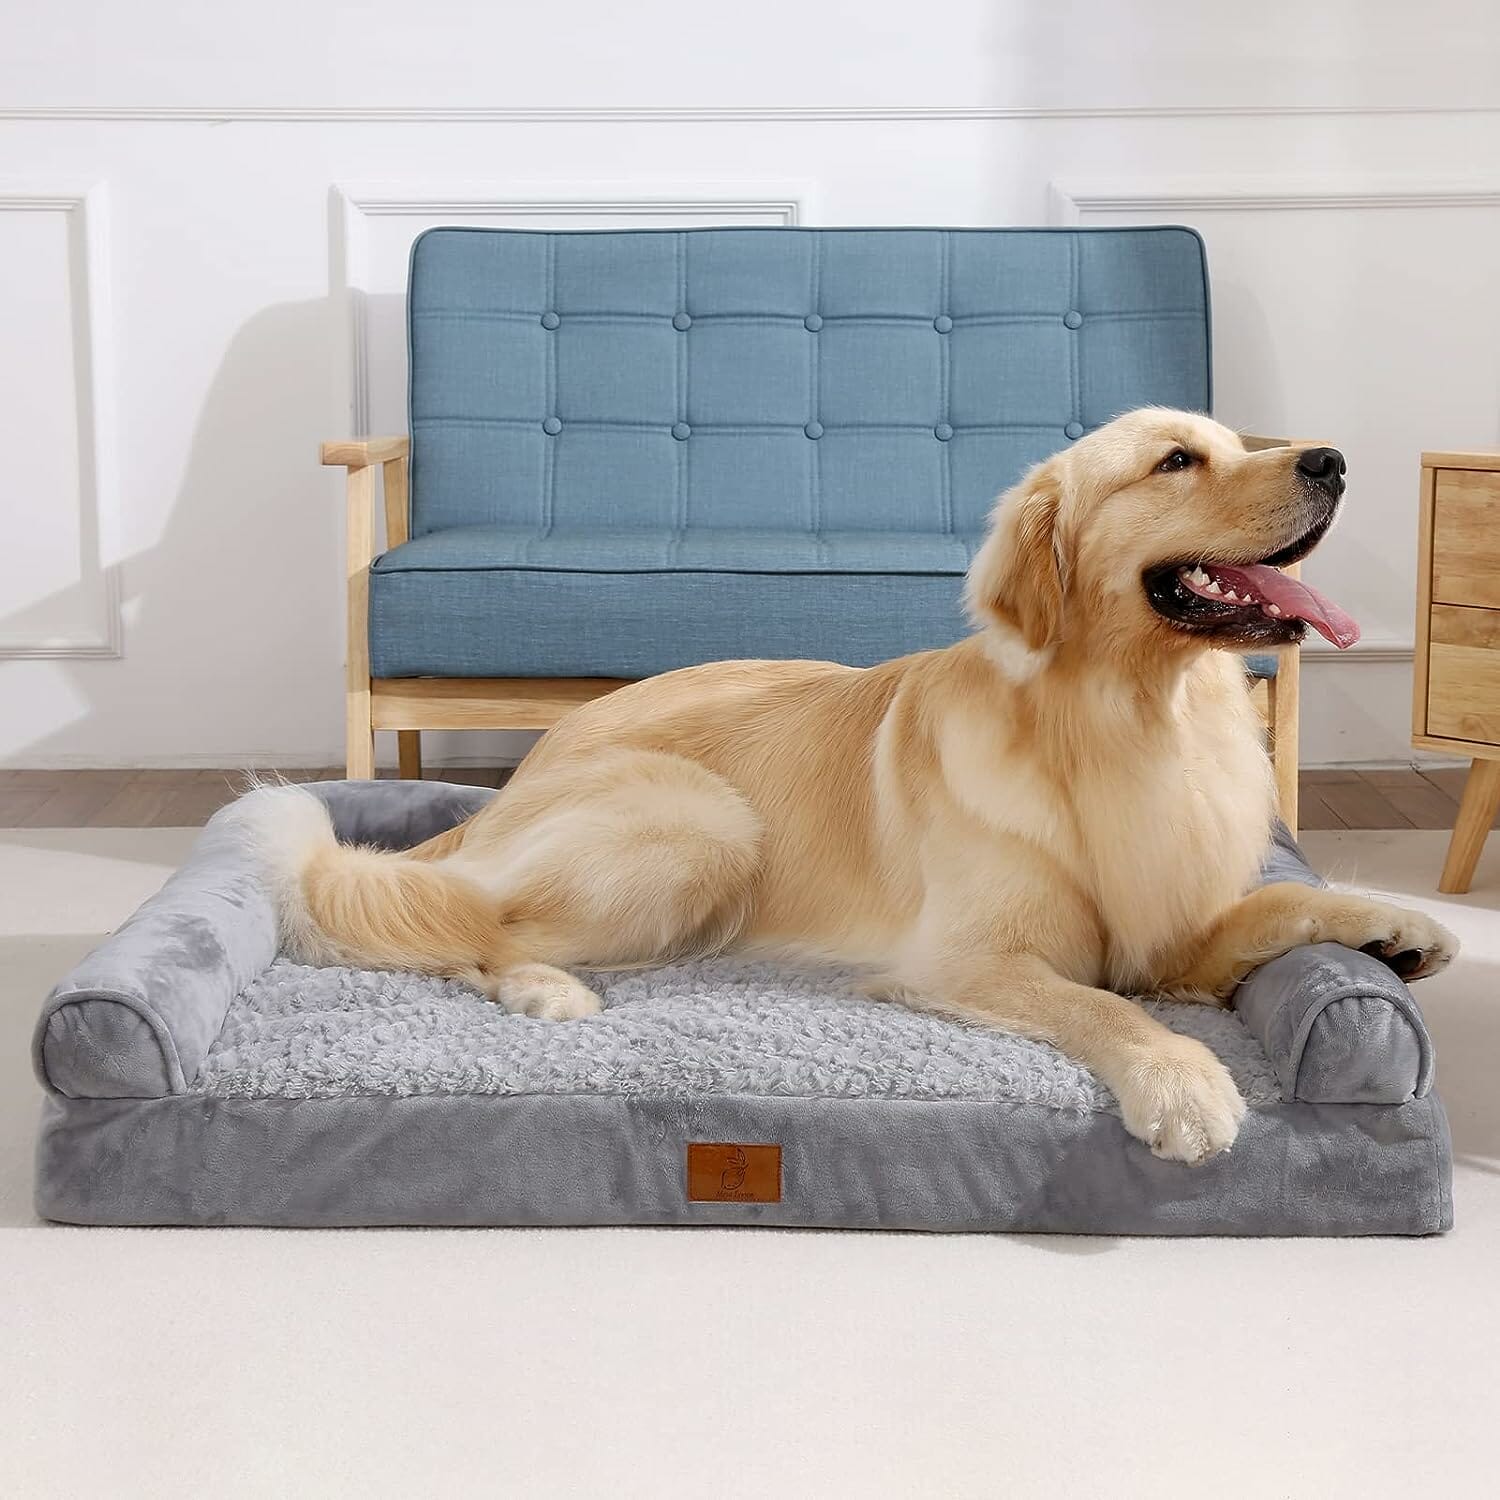 Mesa Lemon Extra Large Dog Bed Review – A Cozy Haven for Your Pup?